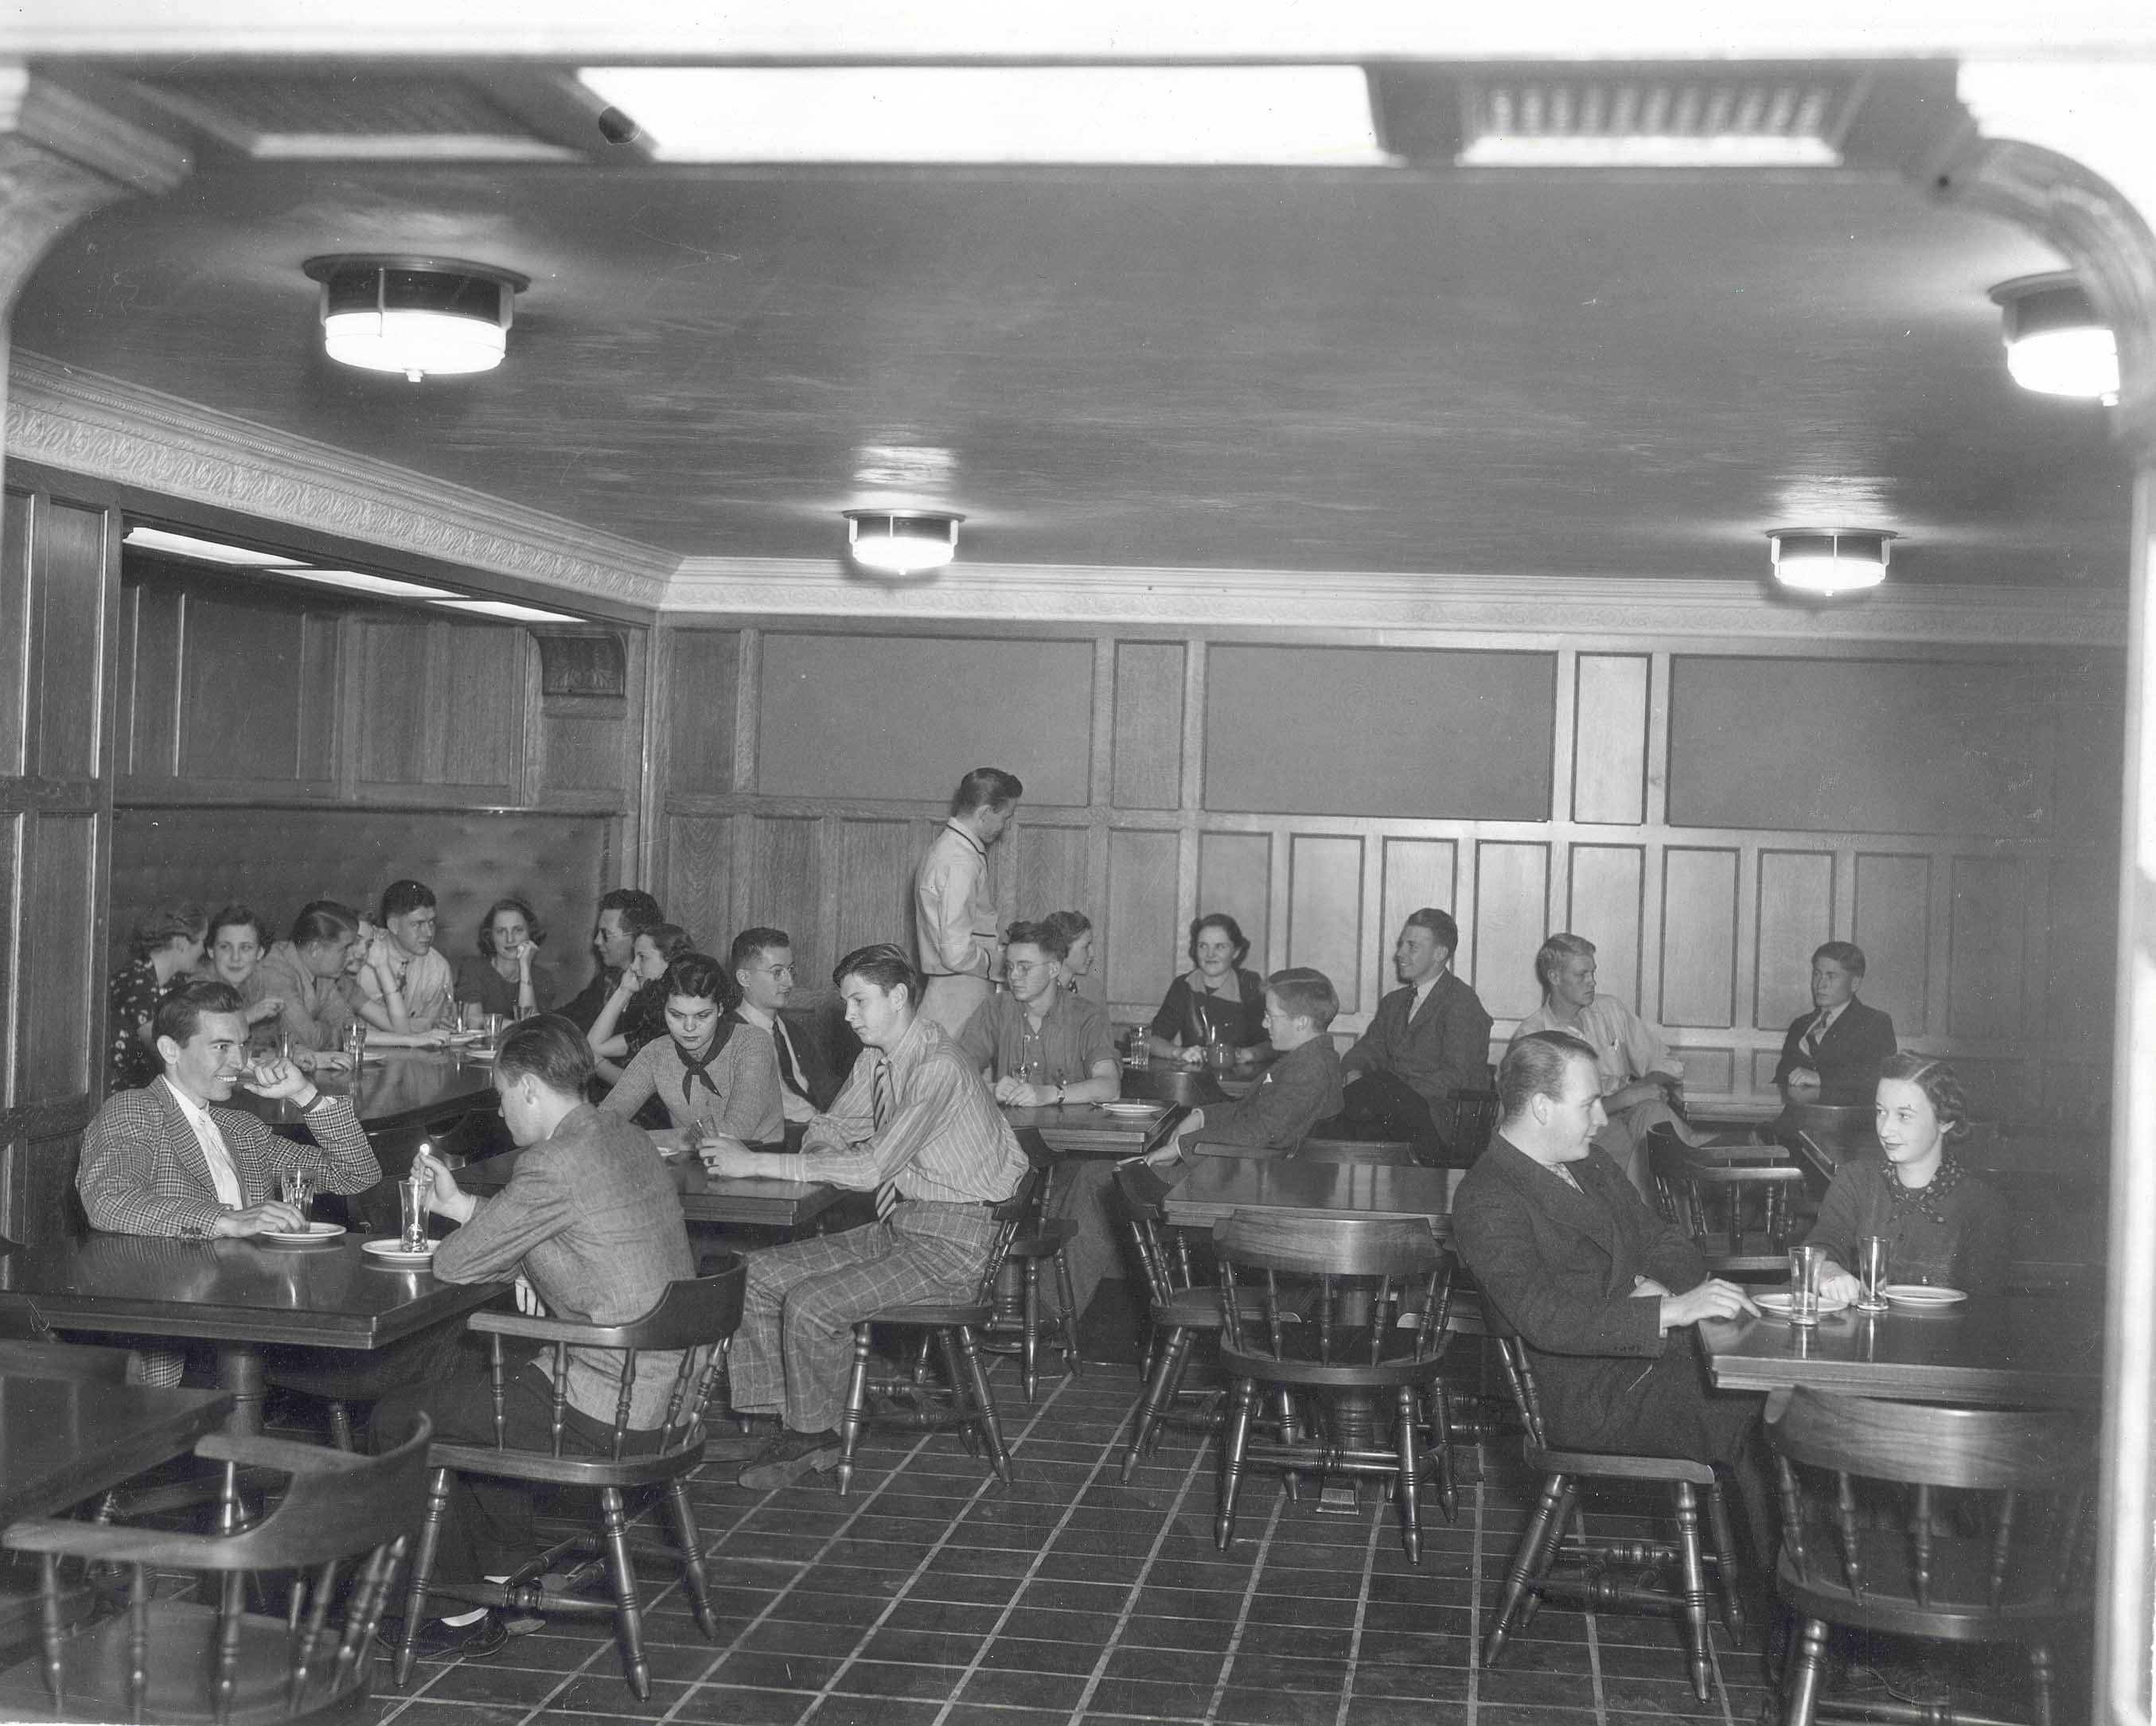 Lennox interior in the late 1930s as the student union <span class="cc-gallery-credit"></span>